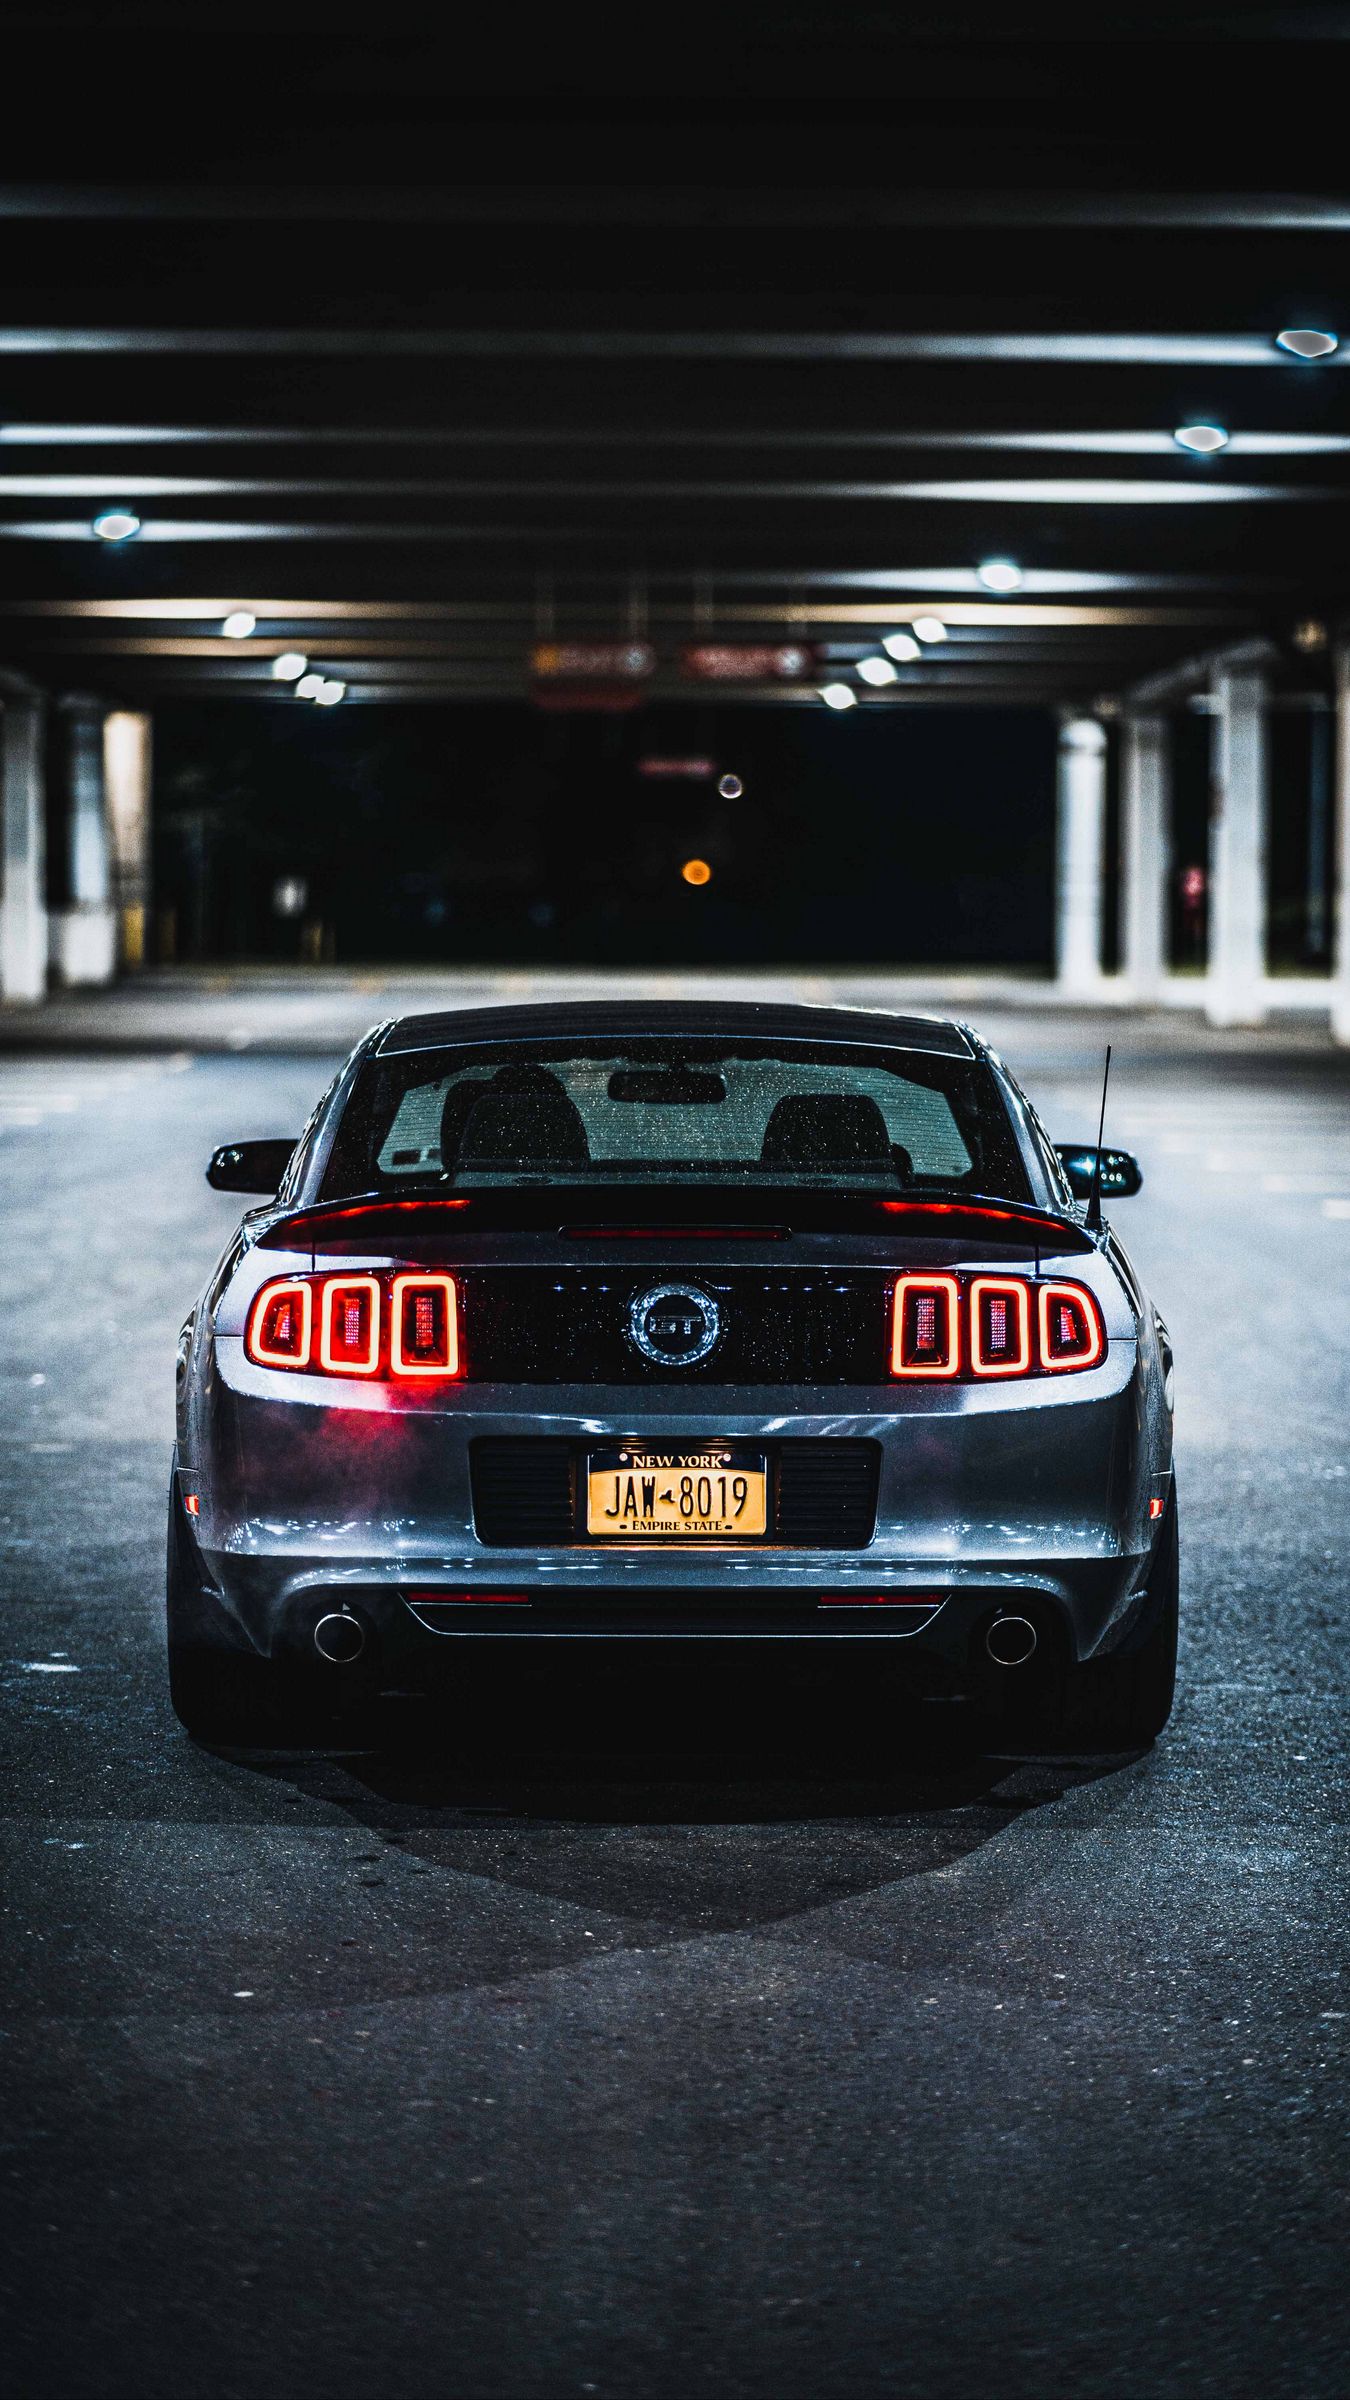 Download wallpaper 1350x2400 ford mustang gt, ford mustang, rear view,  headlights iphone 8+/7+/6s+/6+ for parallax hd background